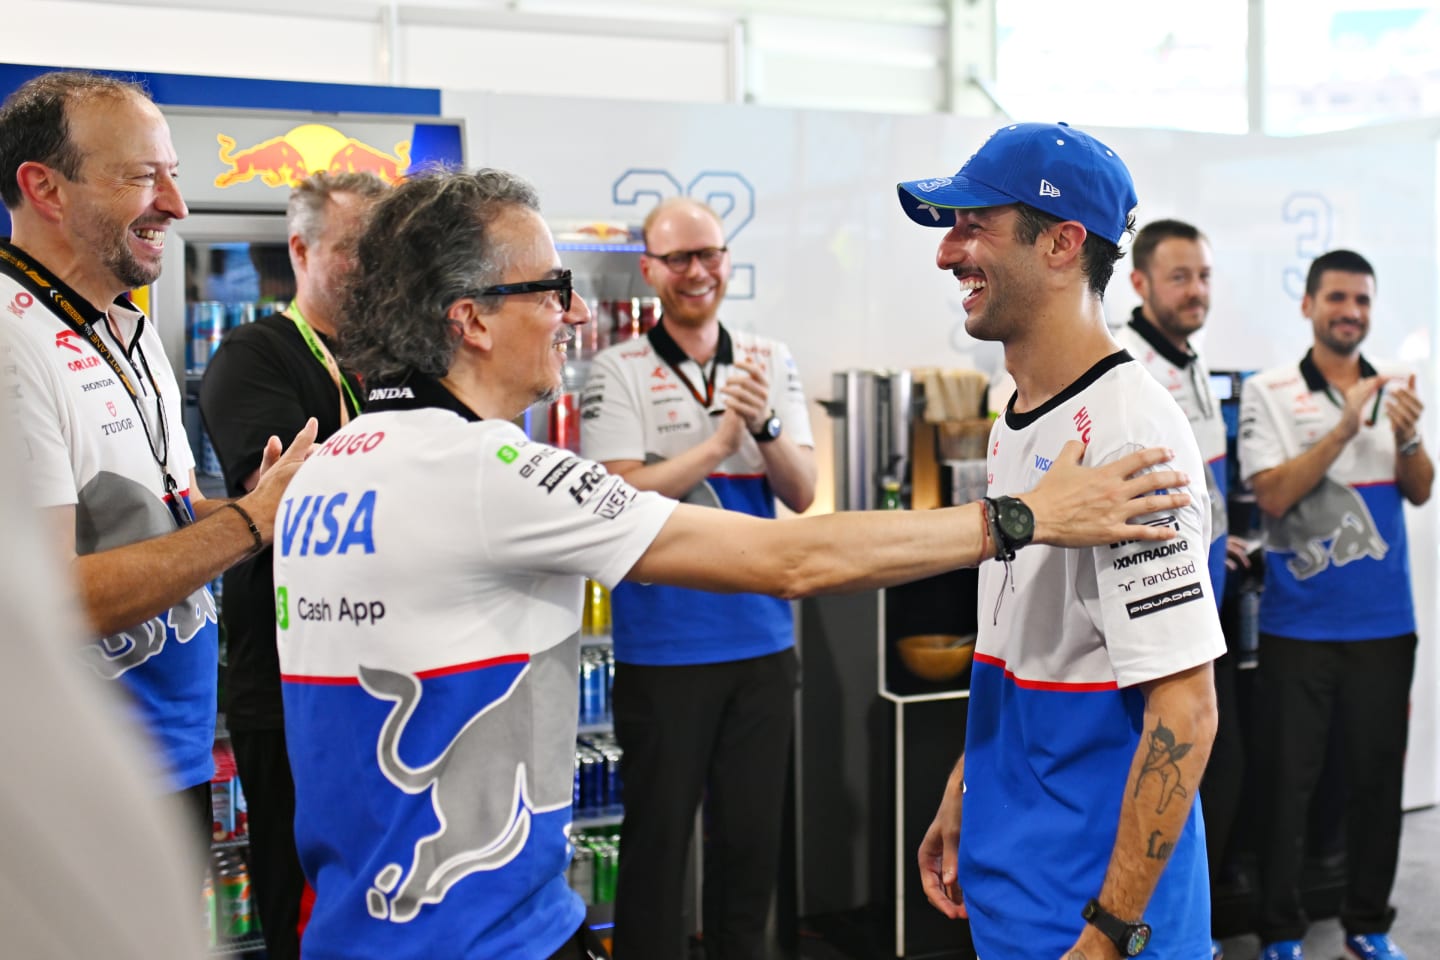 MIAMI, FLORIDA - MAY 04: Laurent Mekies, Team Principal of Visa Cash App RB talks with 4th placed Daniel Ricciardo of Australia and Visa Cash App RB in the Paddock after the Sprint ahead of the F1 Grand Prix of Miami at Miami International Autodrome on May 04, 2024 in Miami, Florida. (Photo by Rudy Carezzevoli/Getty Images)